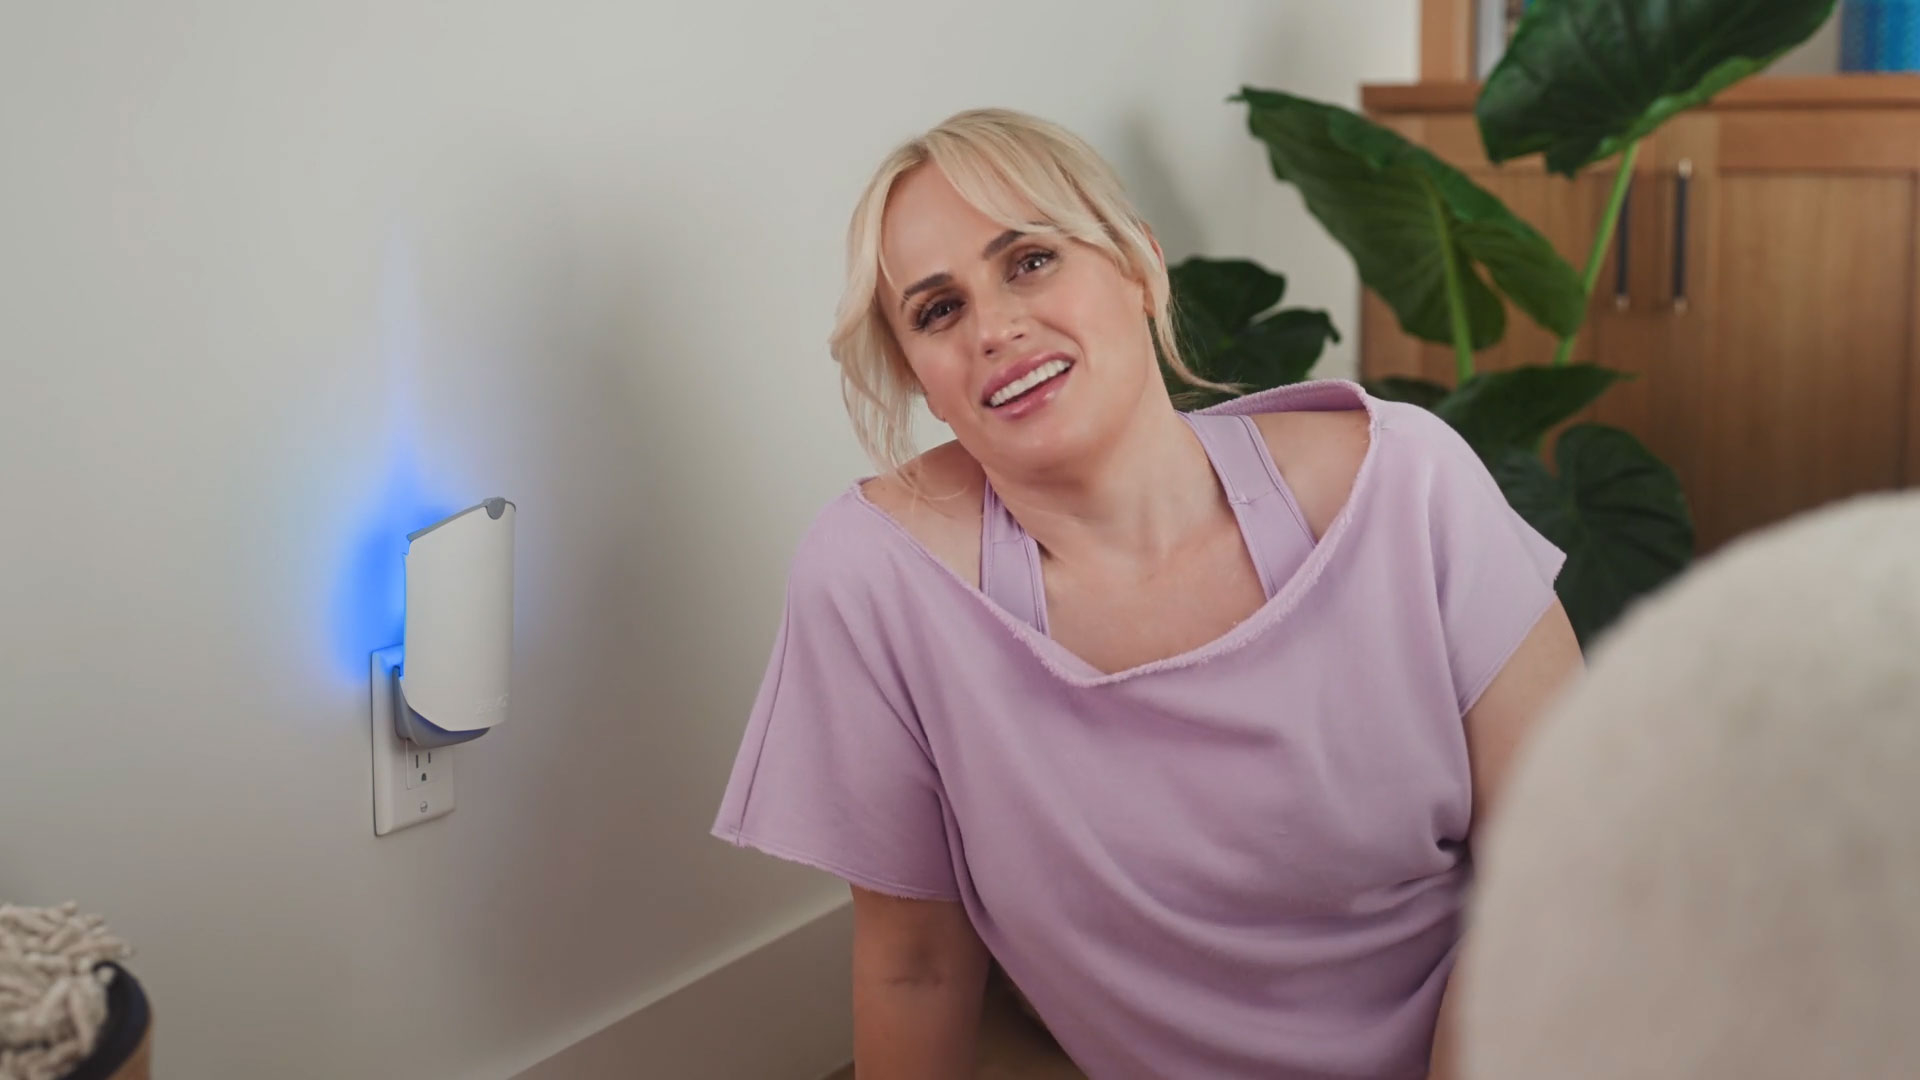 Rebel Wilson partners with Zevo to crush Americans’ Bugxiety (or a fear of bugs) and achieve a whole new level of “clean and serene” this bug season.